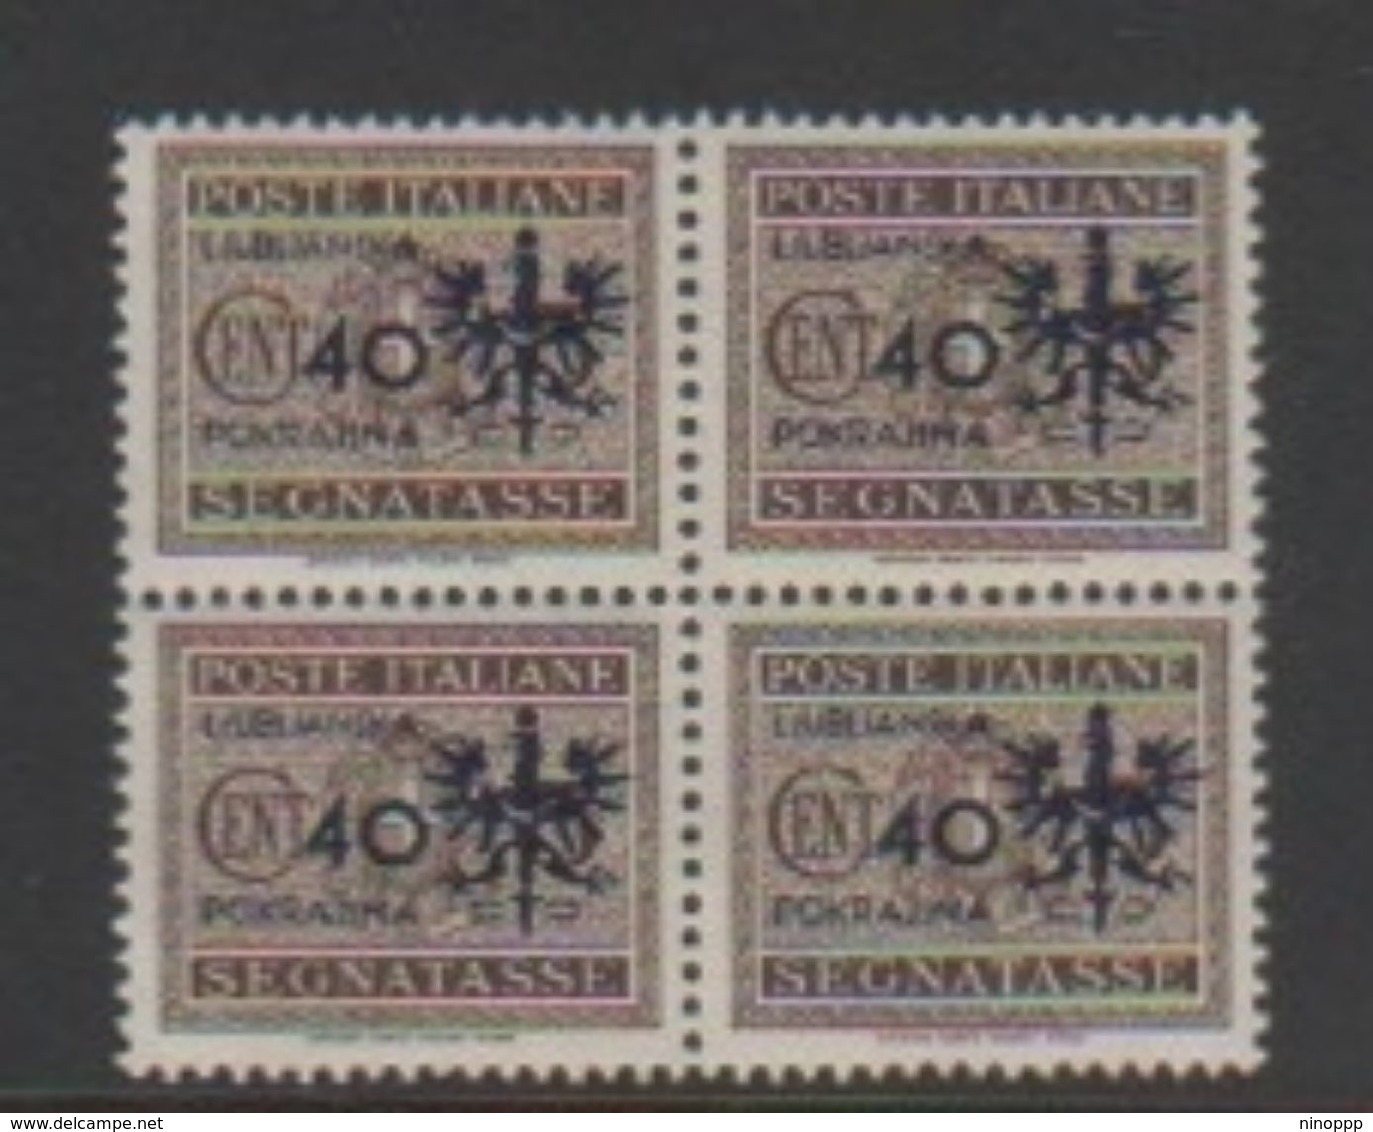 Italy-WW II Occupation-German Occupation Of Lubiana NJ19 1944 Postage Due,40c On 5c Brown Block 4,Mint Never Hinged - German Occ.: Lubiana